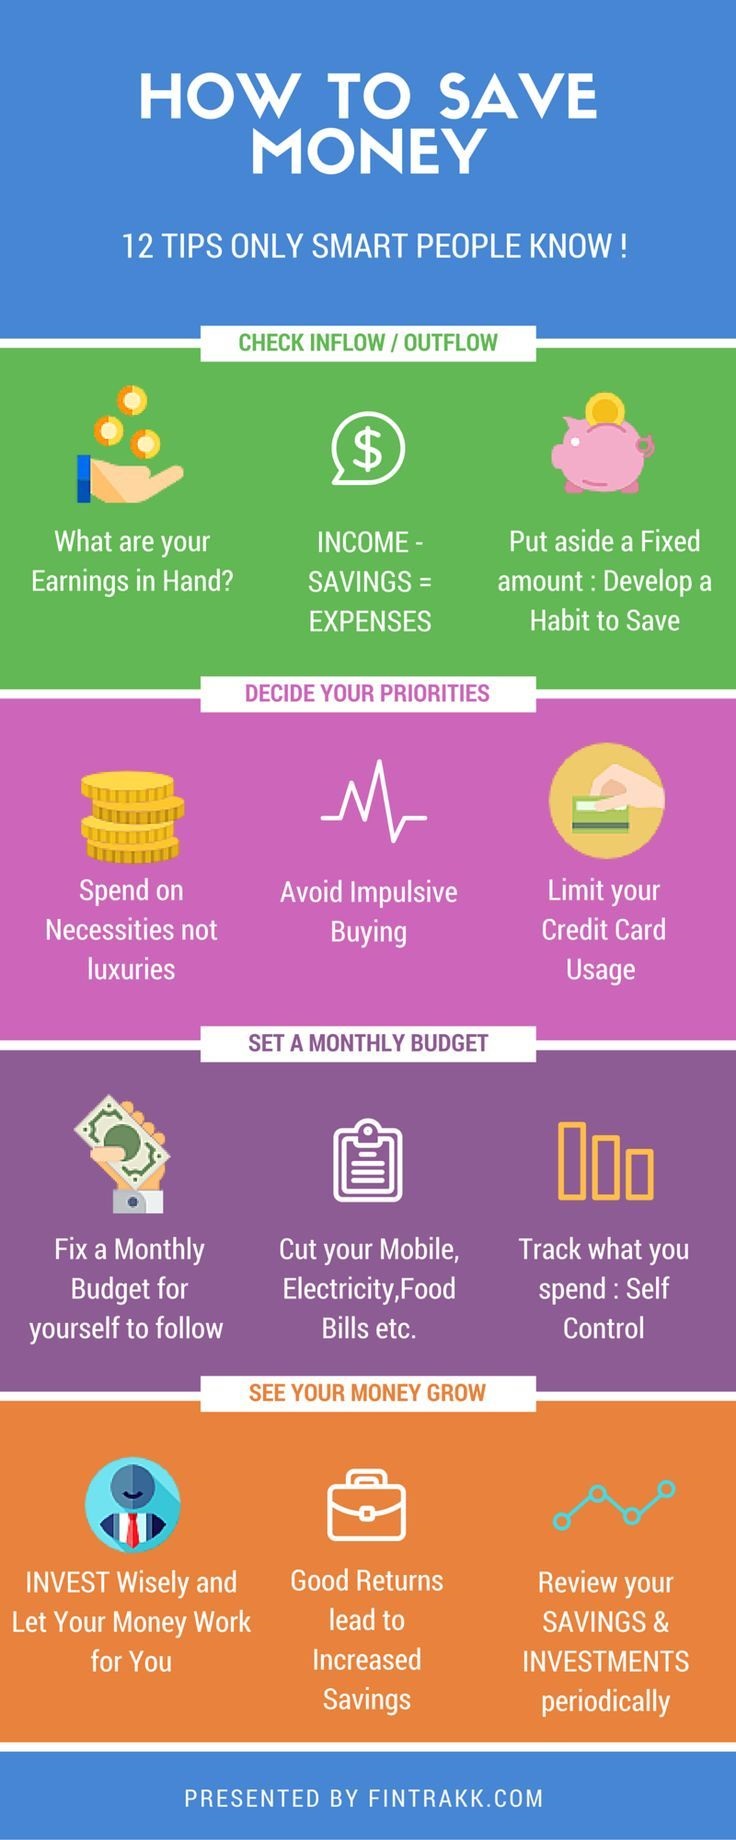 Infographic on how to save money